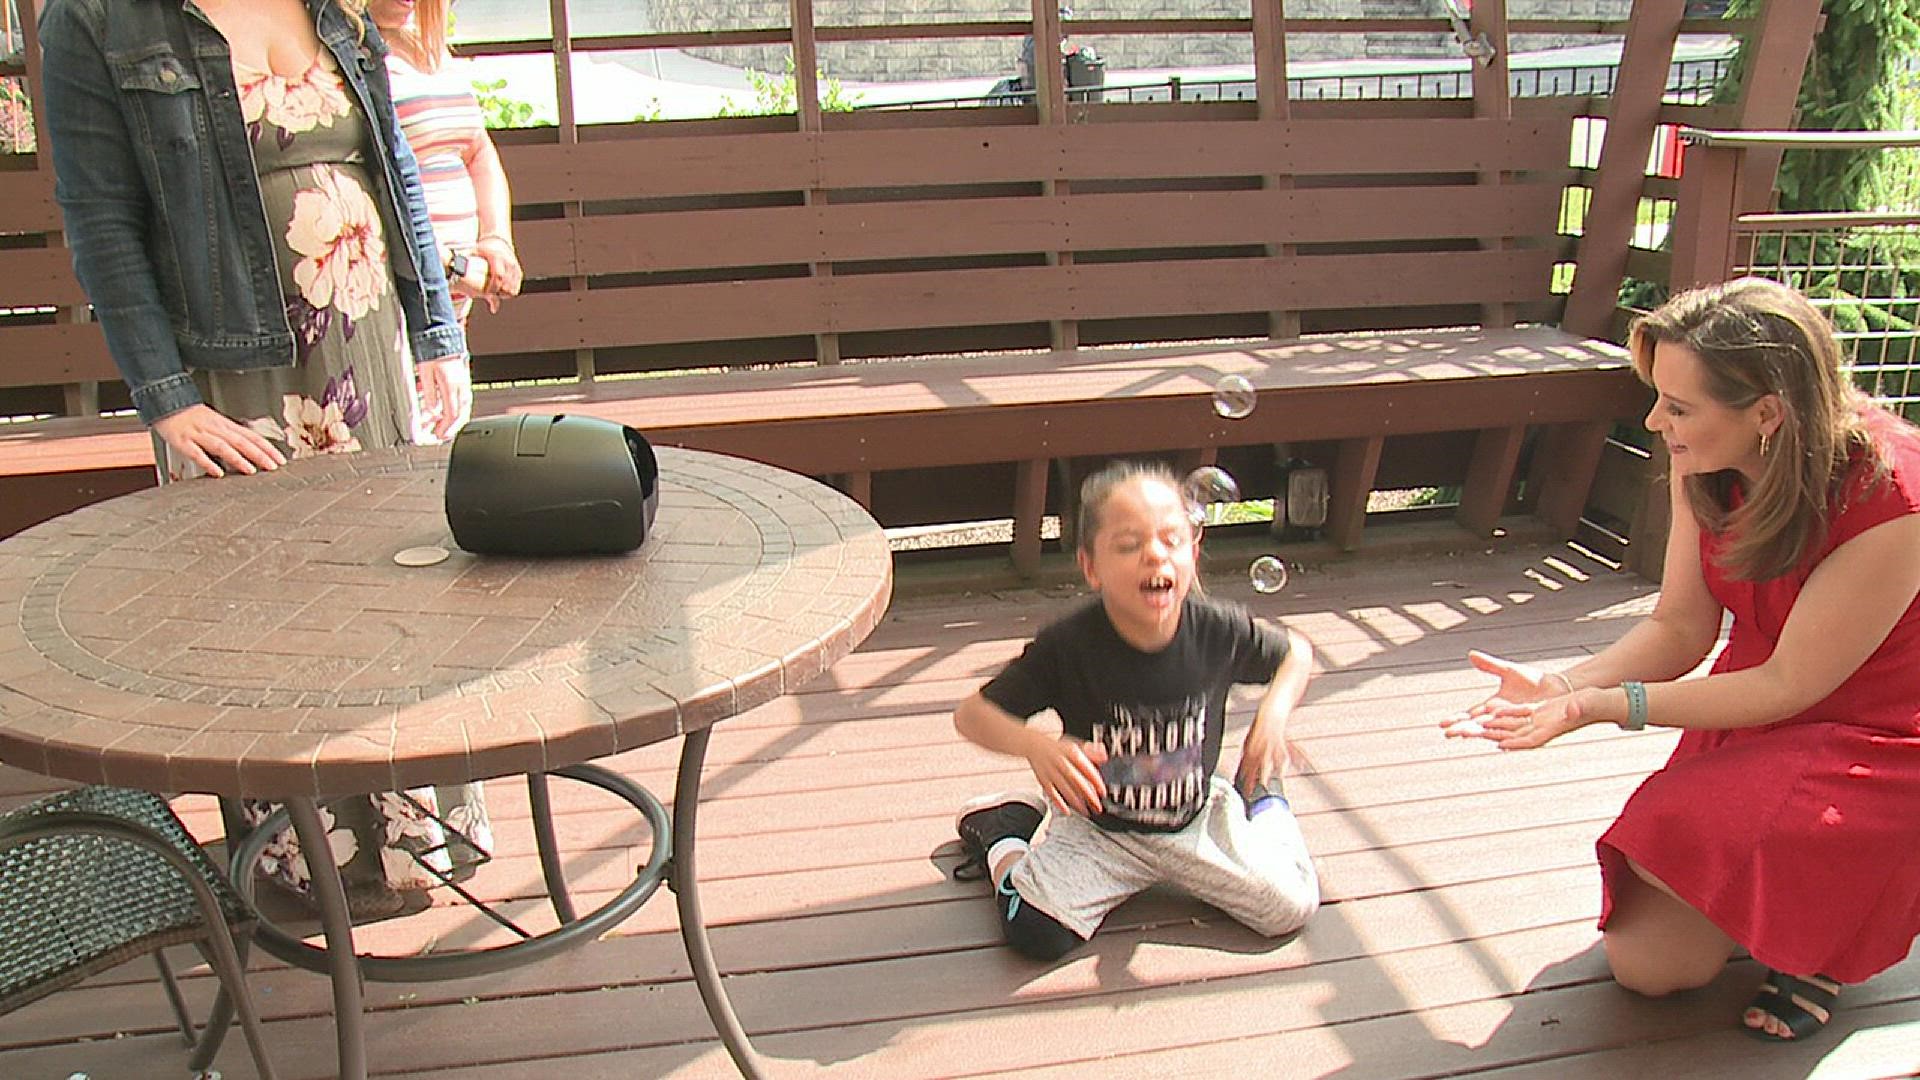 Bouncing bubbles and fast on his feet, this little guy is passing all expectations!